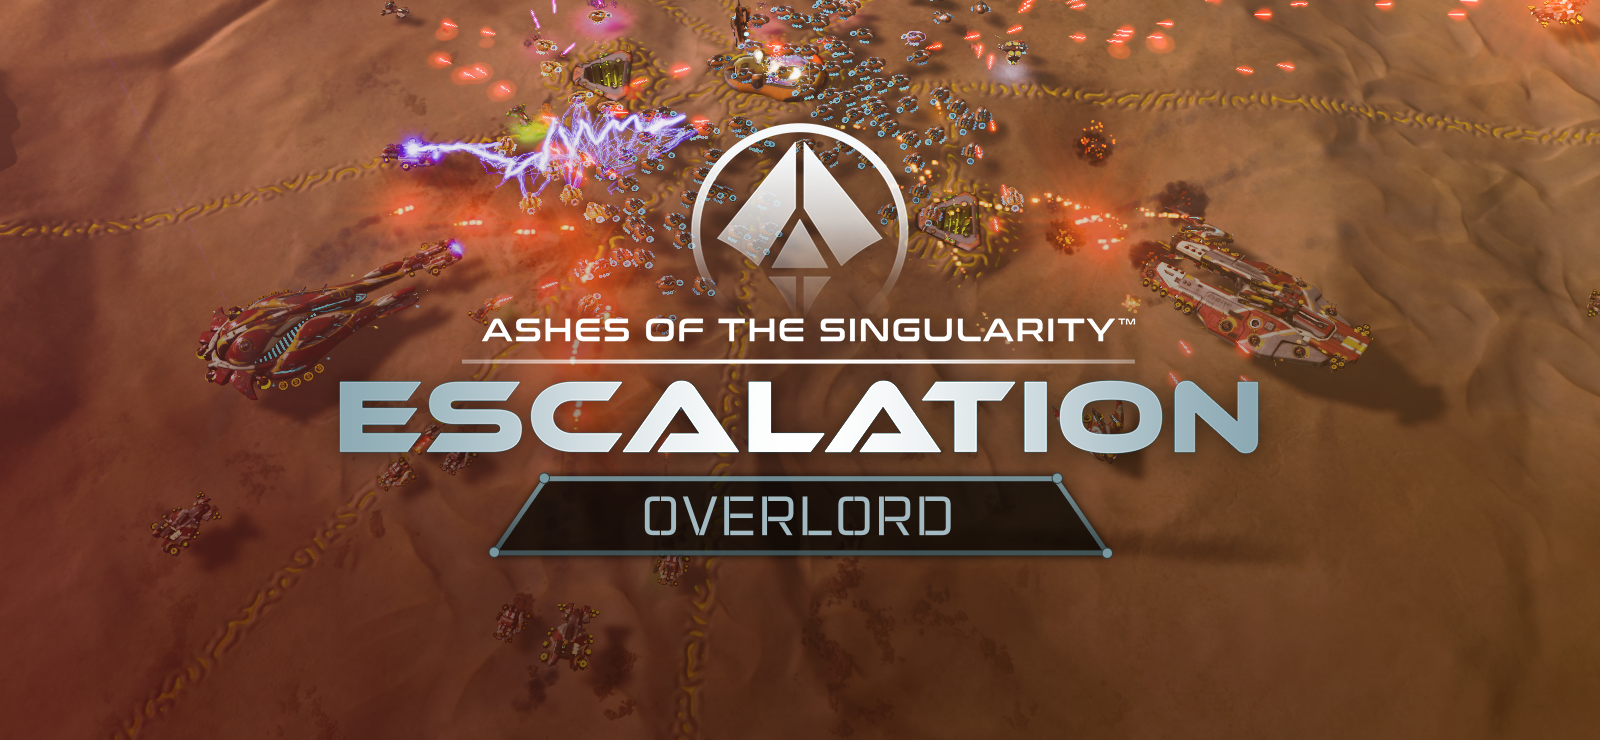 Ashes Of The Singularity: Escalation - Overlord Scenario Pack DLC